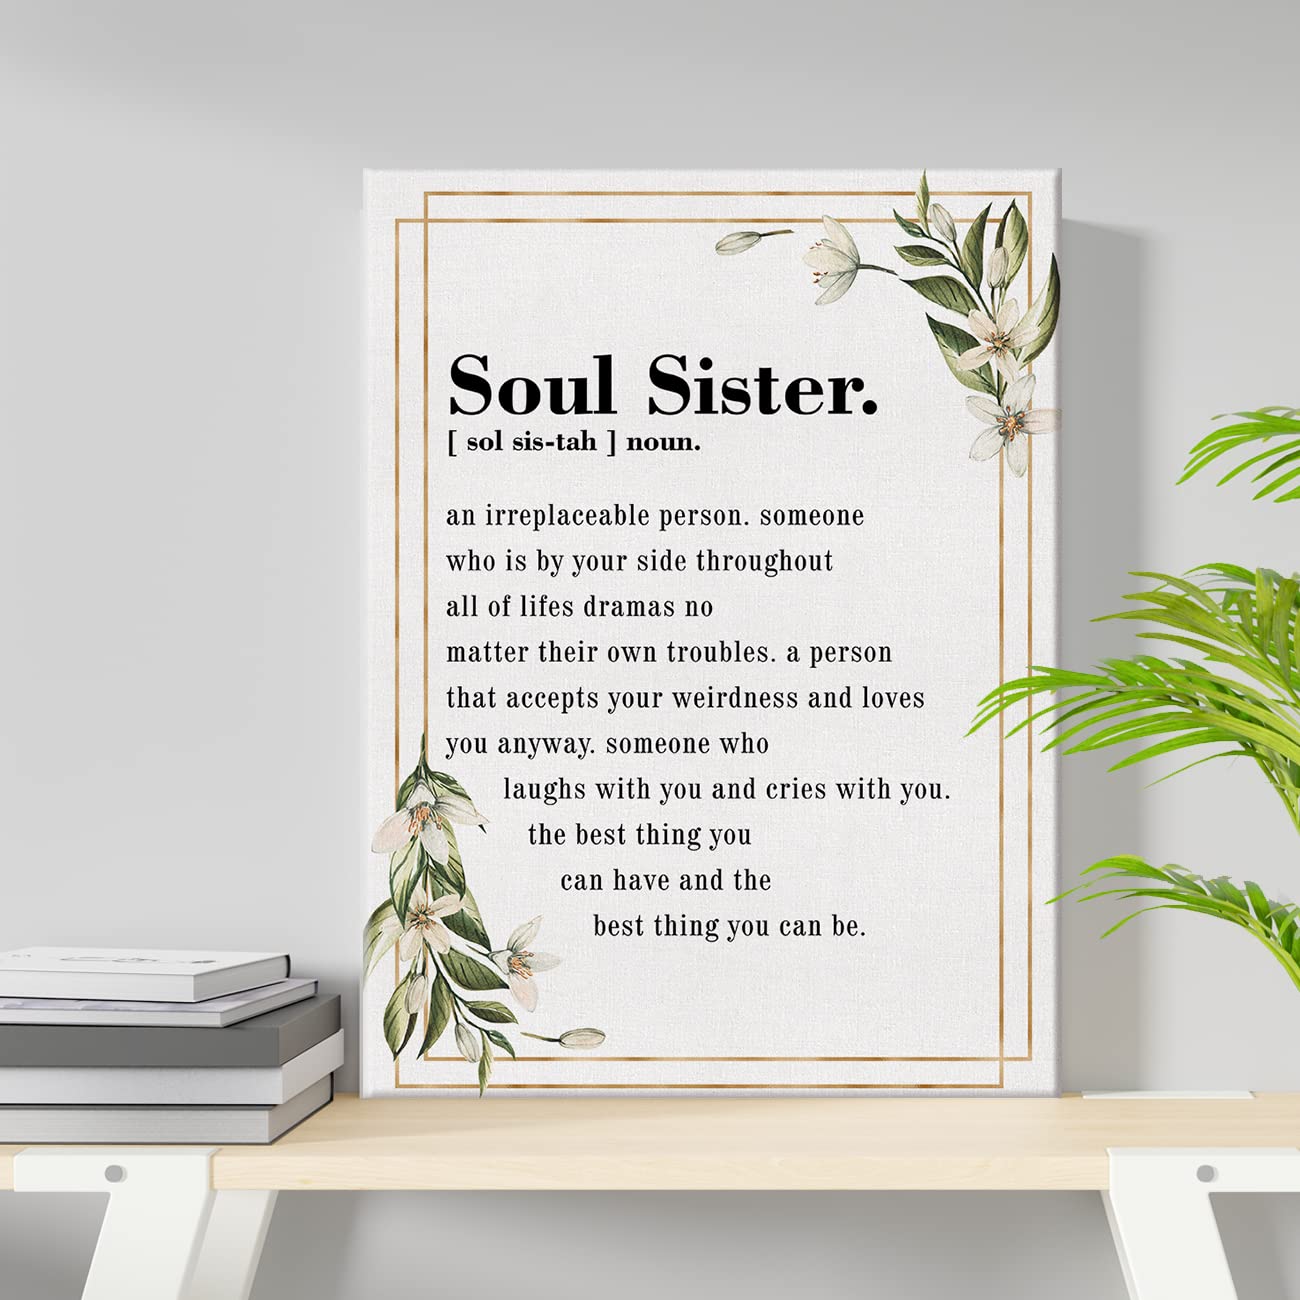 Soul Sister Definition Watercolor Canvas Print Decor an Irreplaceable Person Wall Painting Posters Artwork 11.5"x15" Gift for Home Office Decor (Wooden Framed)